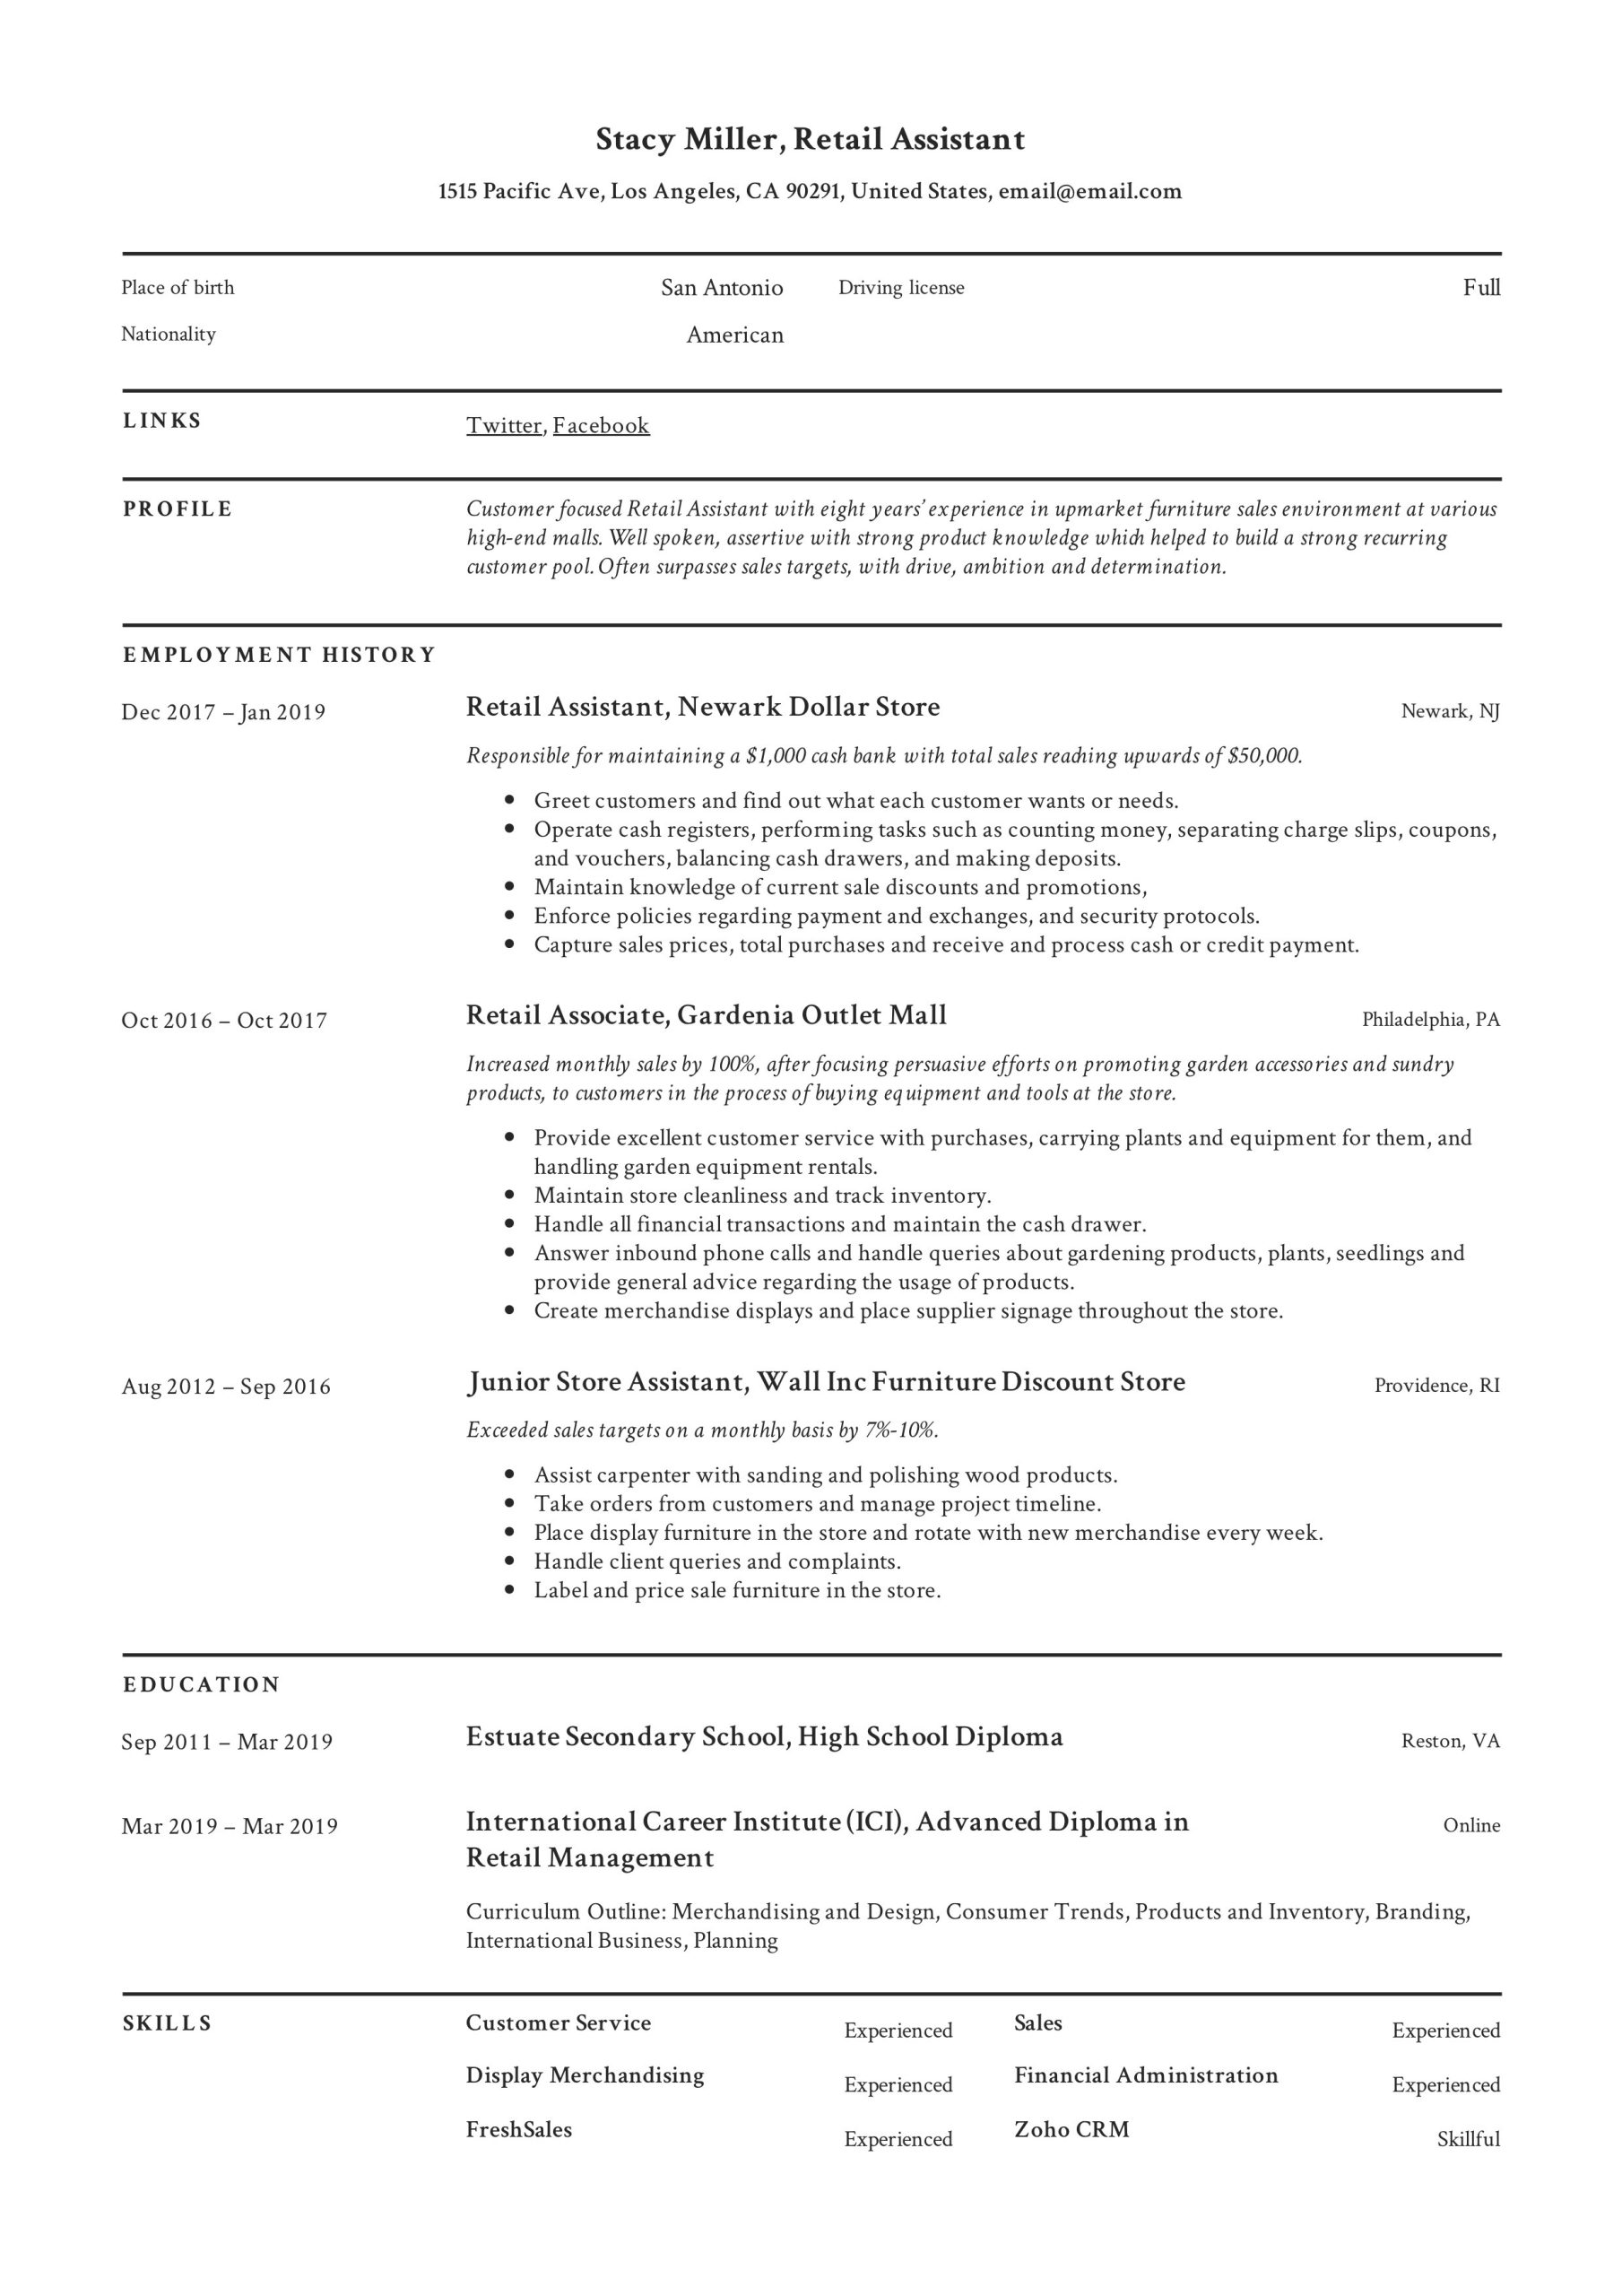 Overview Sample for Resume On Retail Retail Resume Examples 2022 Free Downloads Pdfs